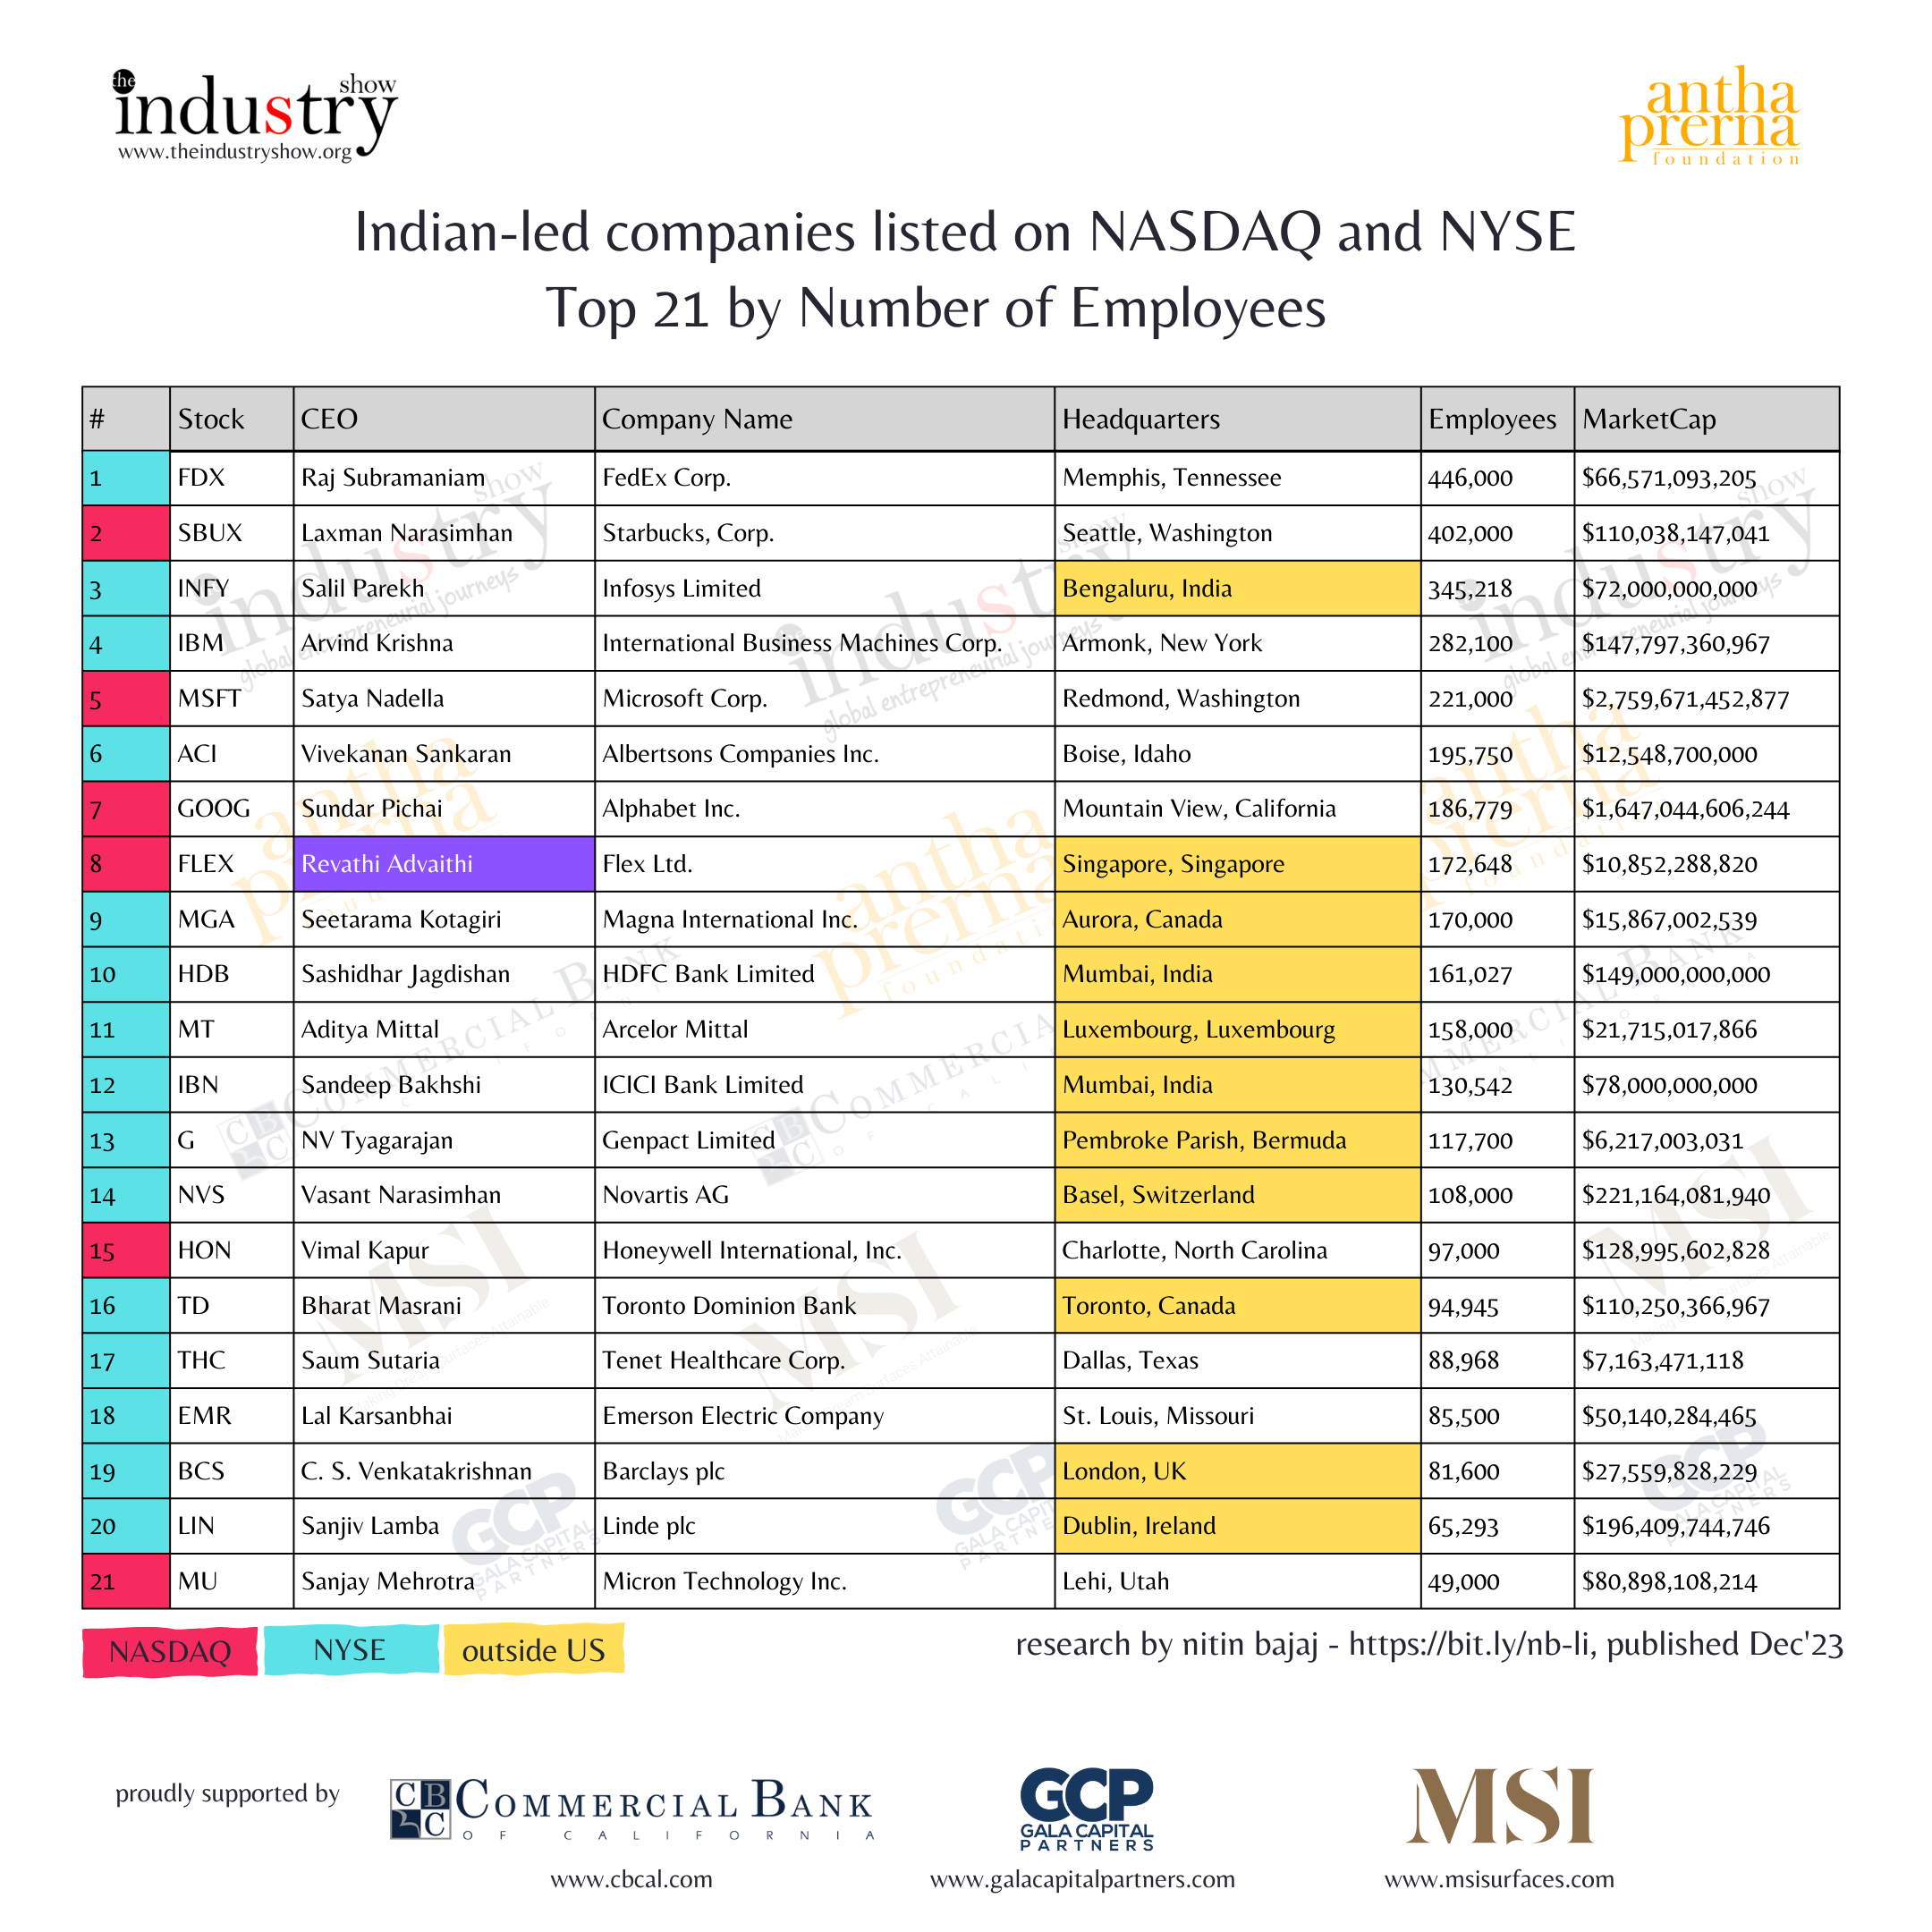 Indian-led companies listed on NASDAQ and NYSE Top 21 by no. of employees